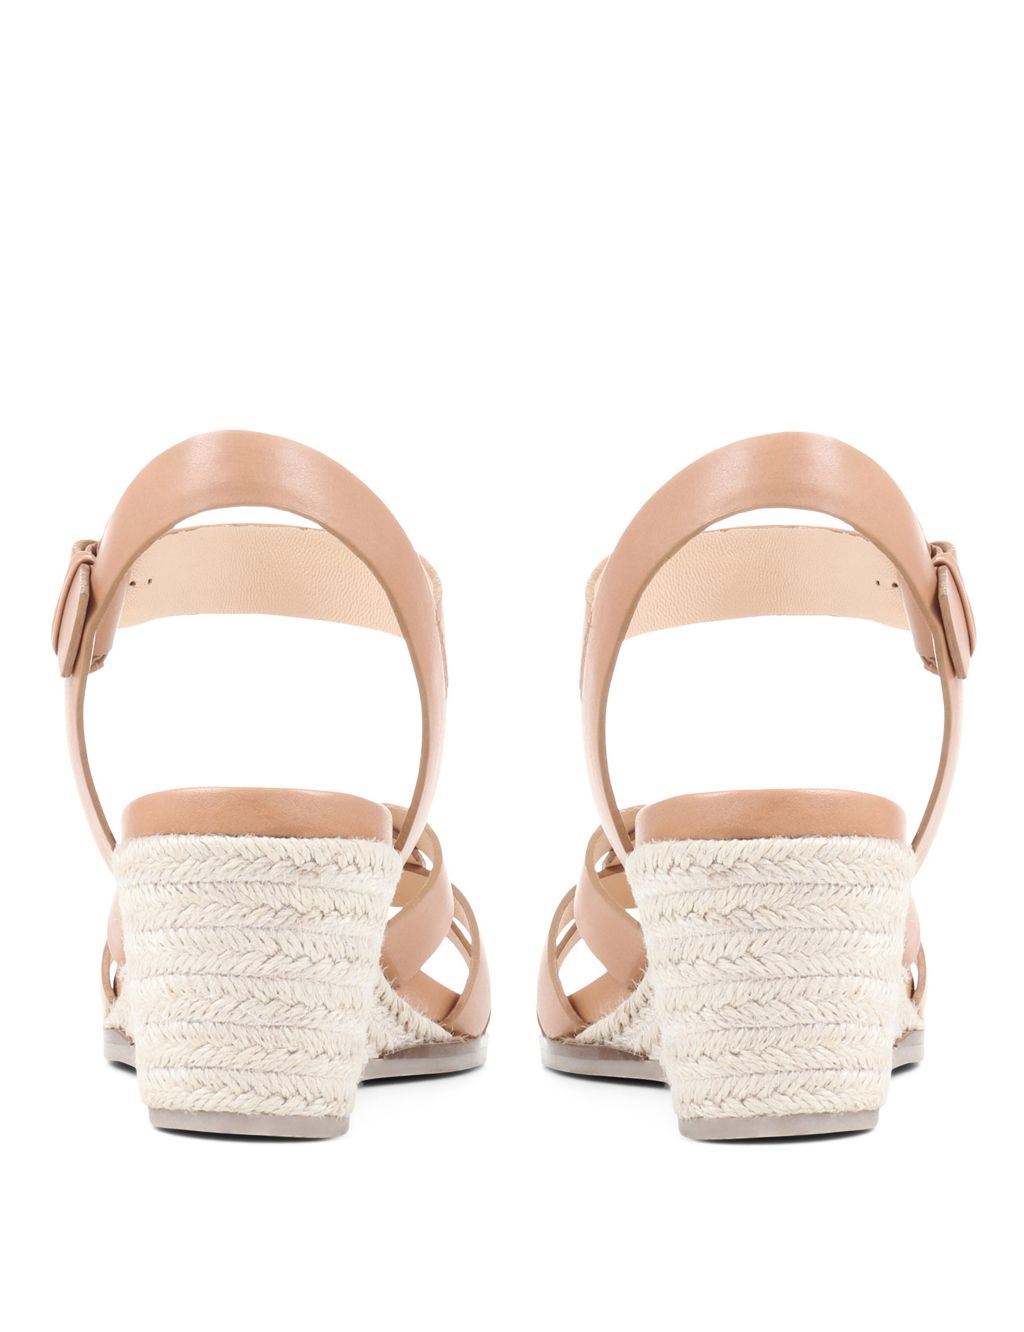 Leather Strappy Wedge Sandals image 4